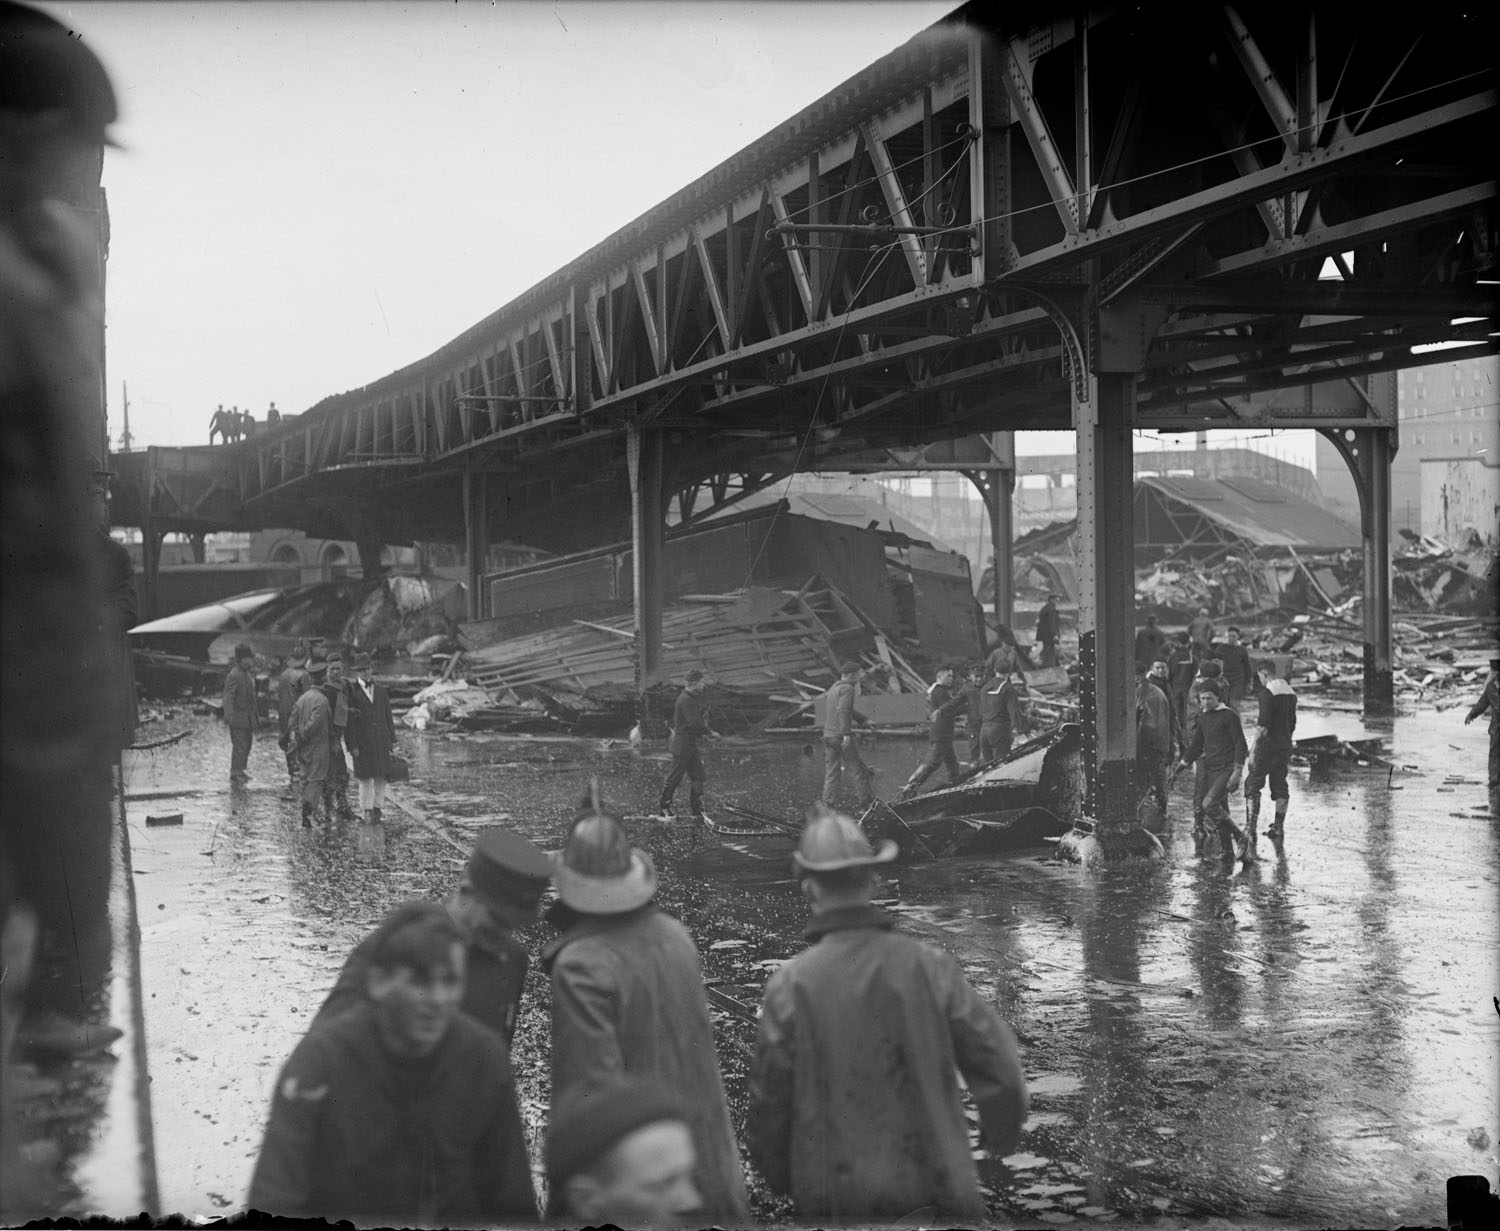 The Great Molasses Flood